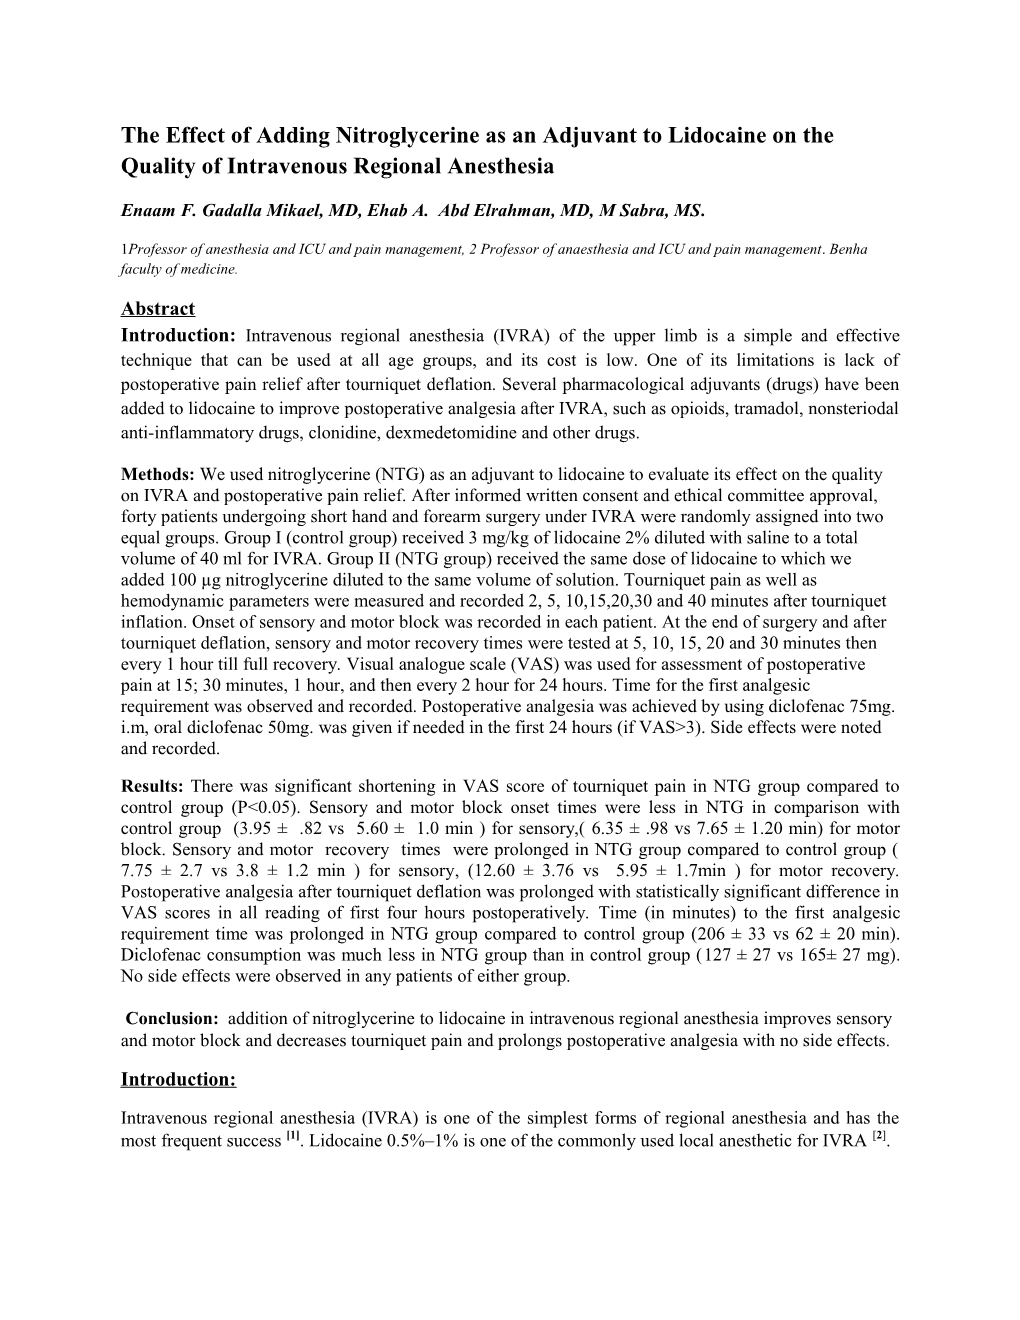 The Effect of Adding Nitroglycerineas an Adjuvant to Lidocaine Onthe Quality of Intravenous